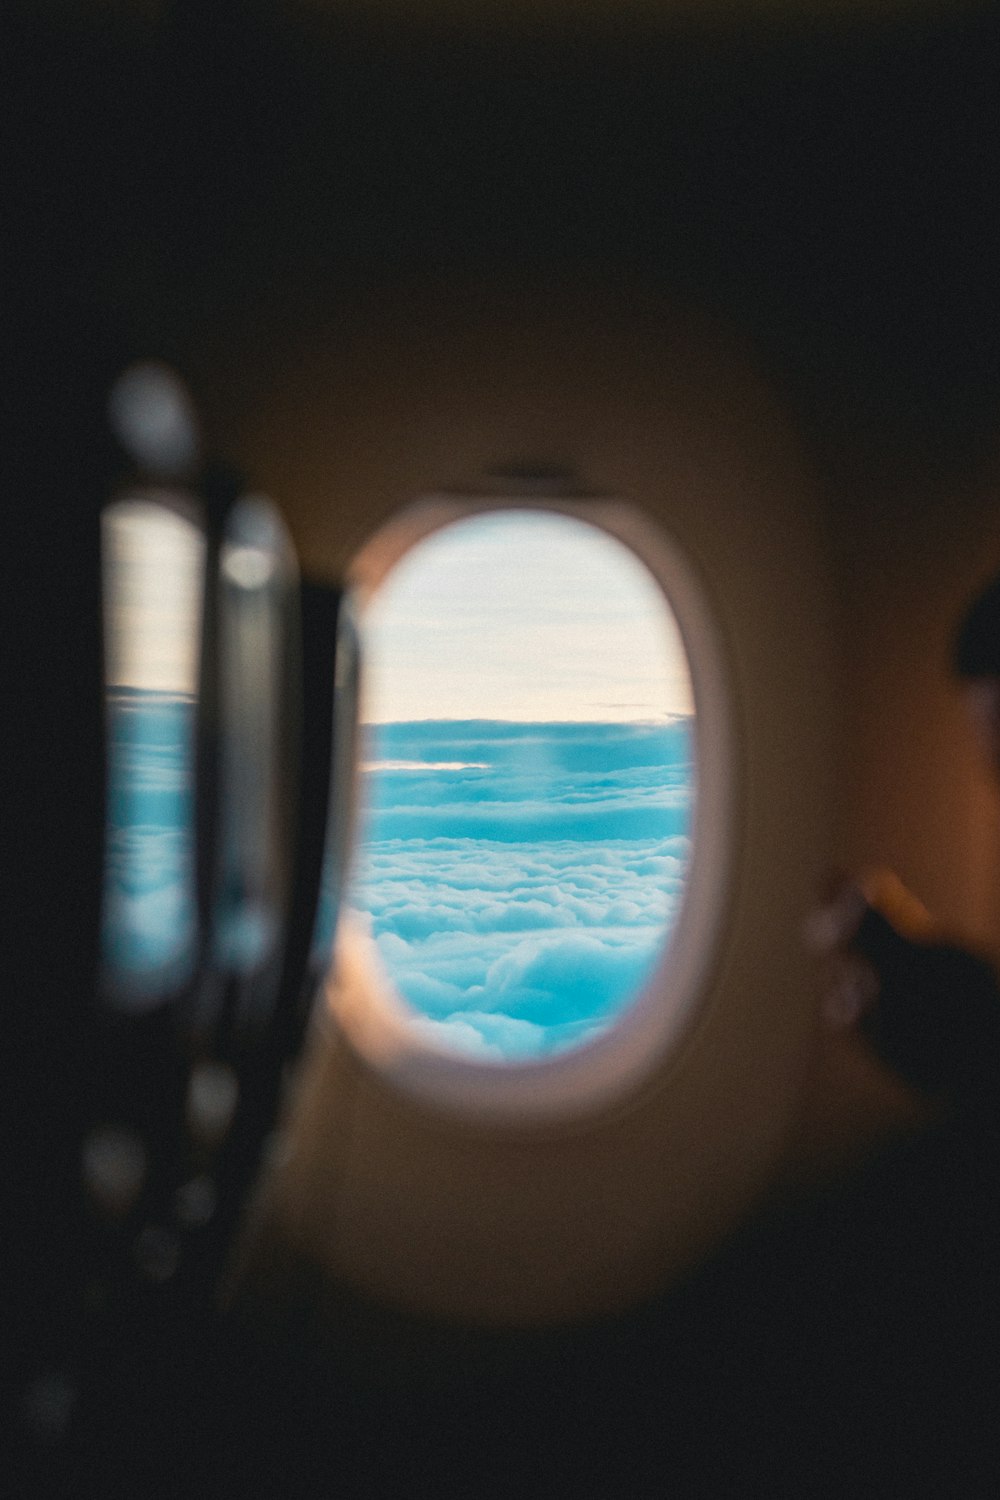 a view of a body of water through an airplane window